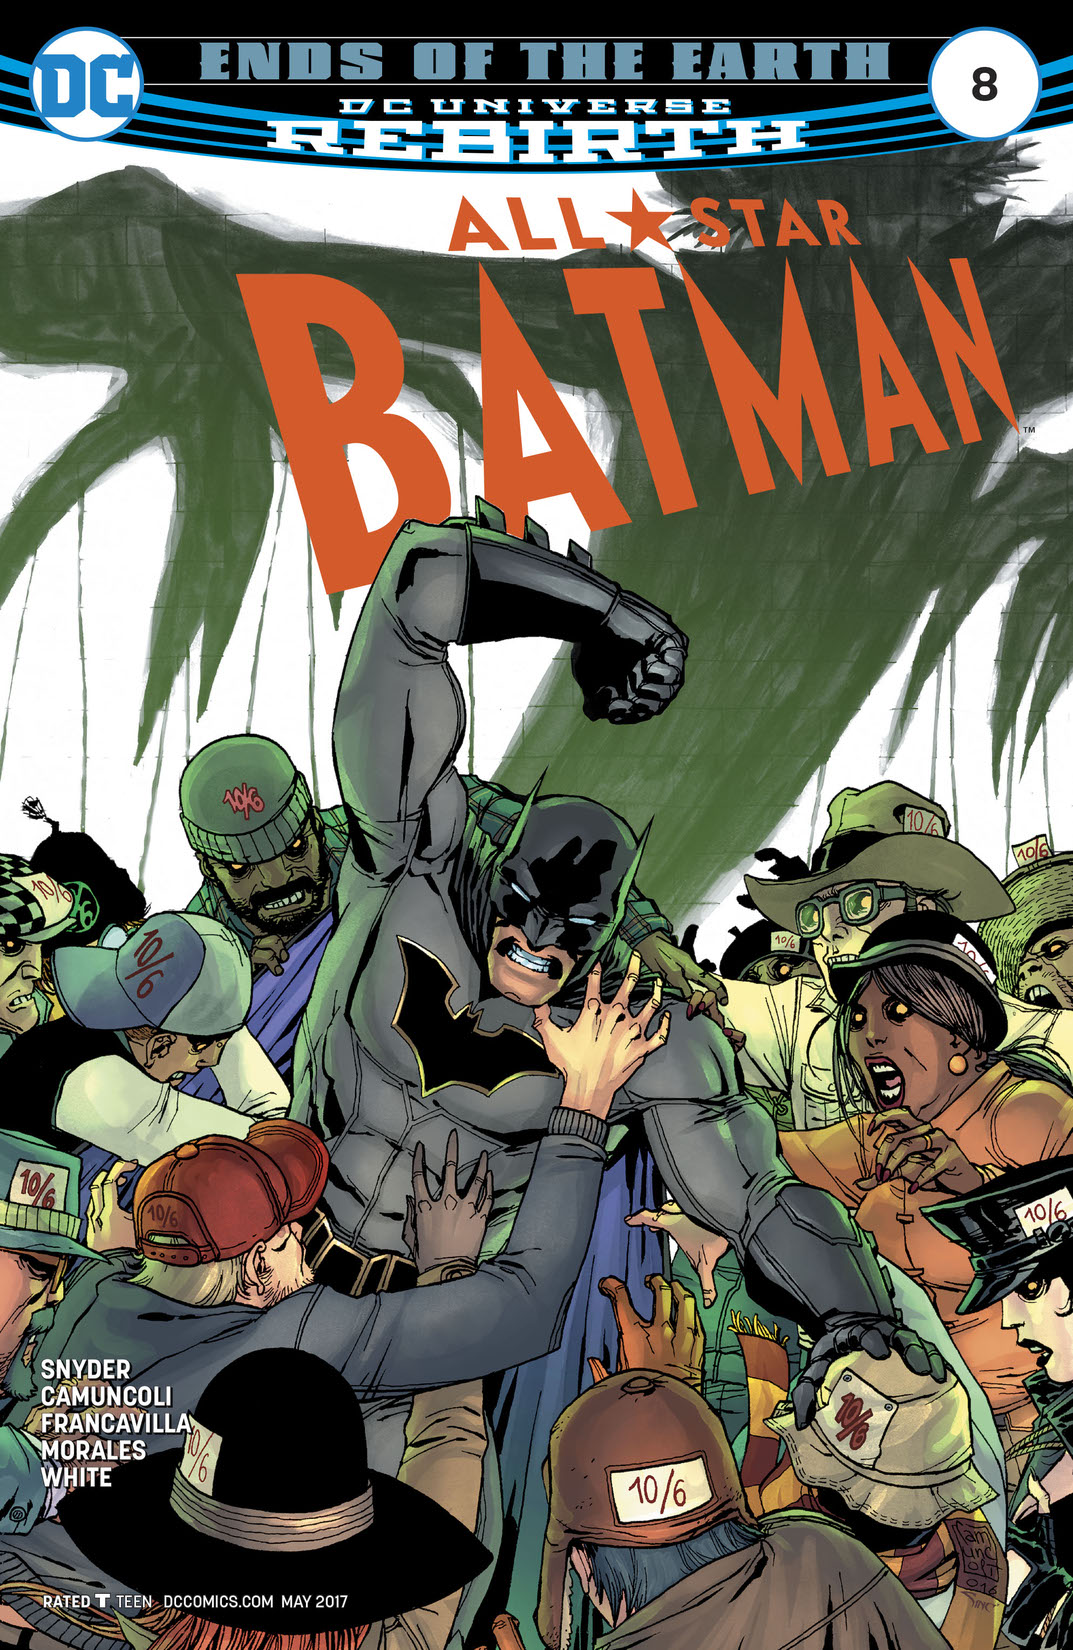 All Star Batman #8 preview images